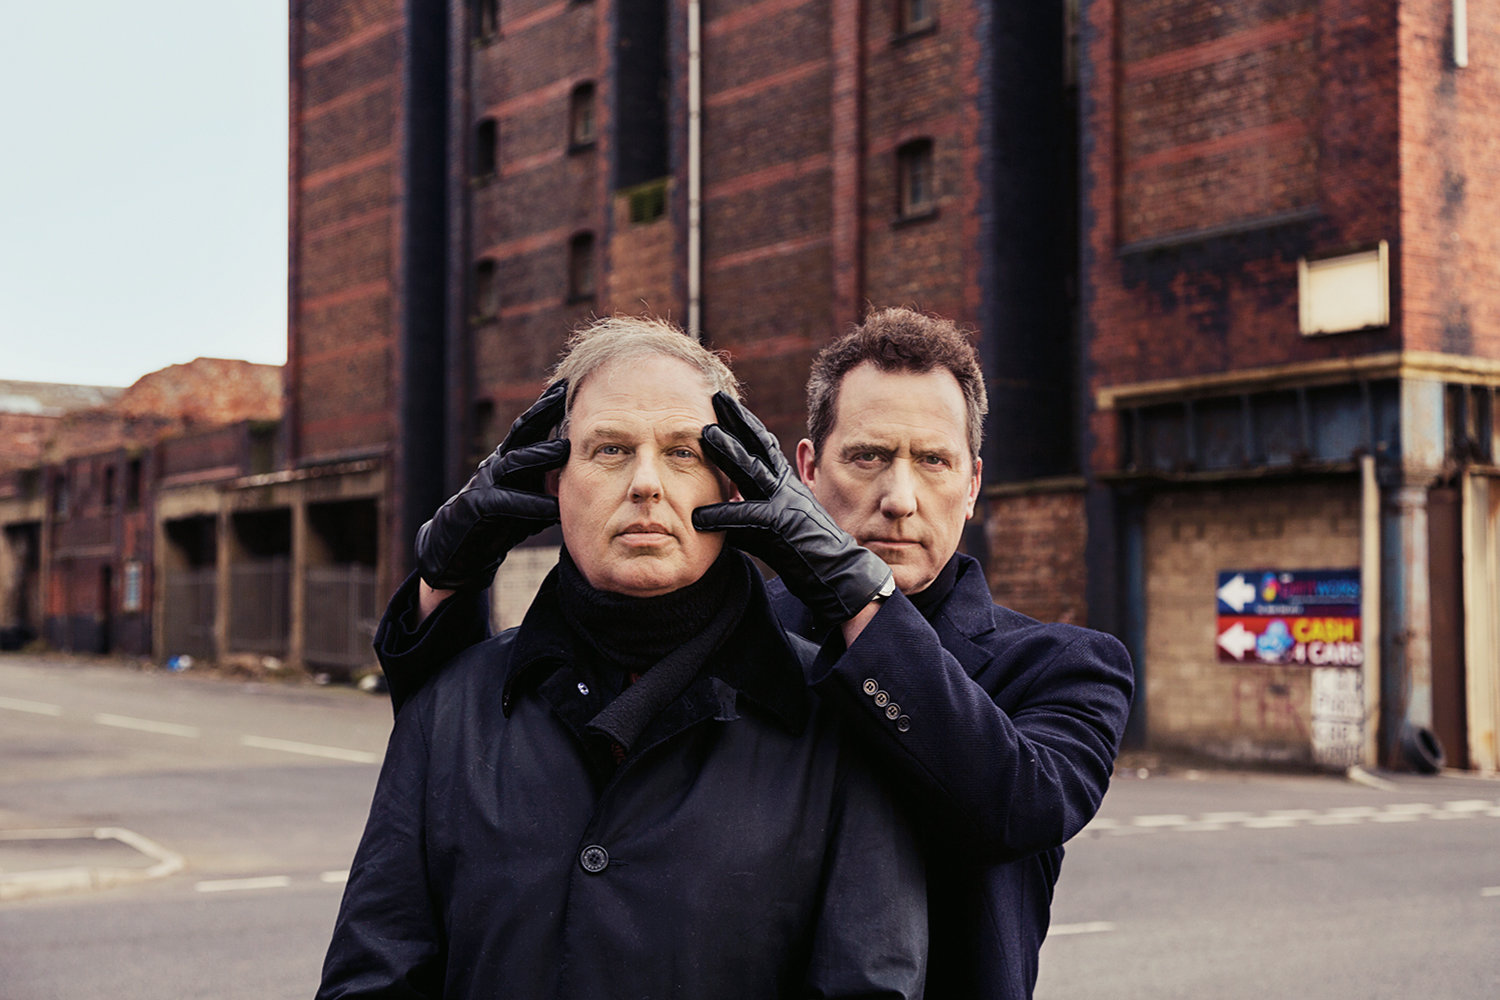 OMD to play in Bristol at the Colston Hall